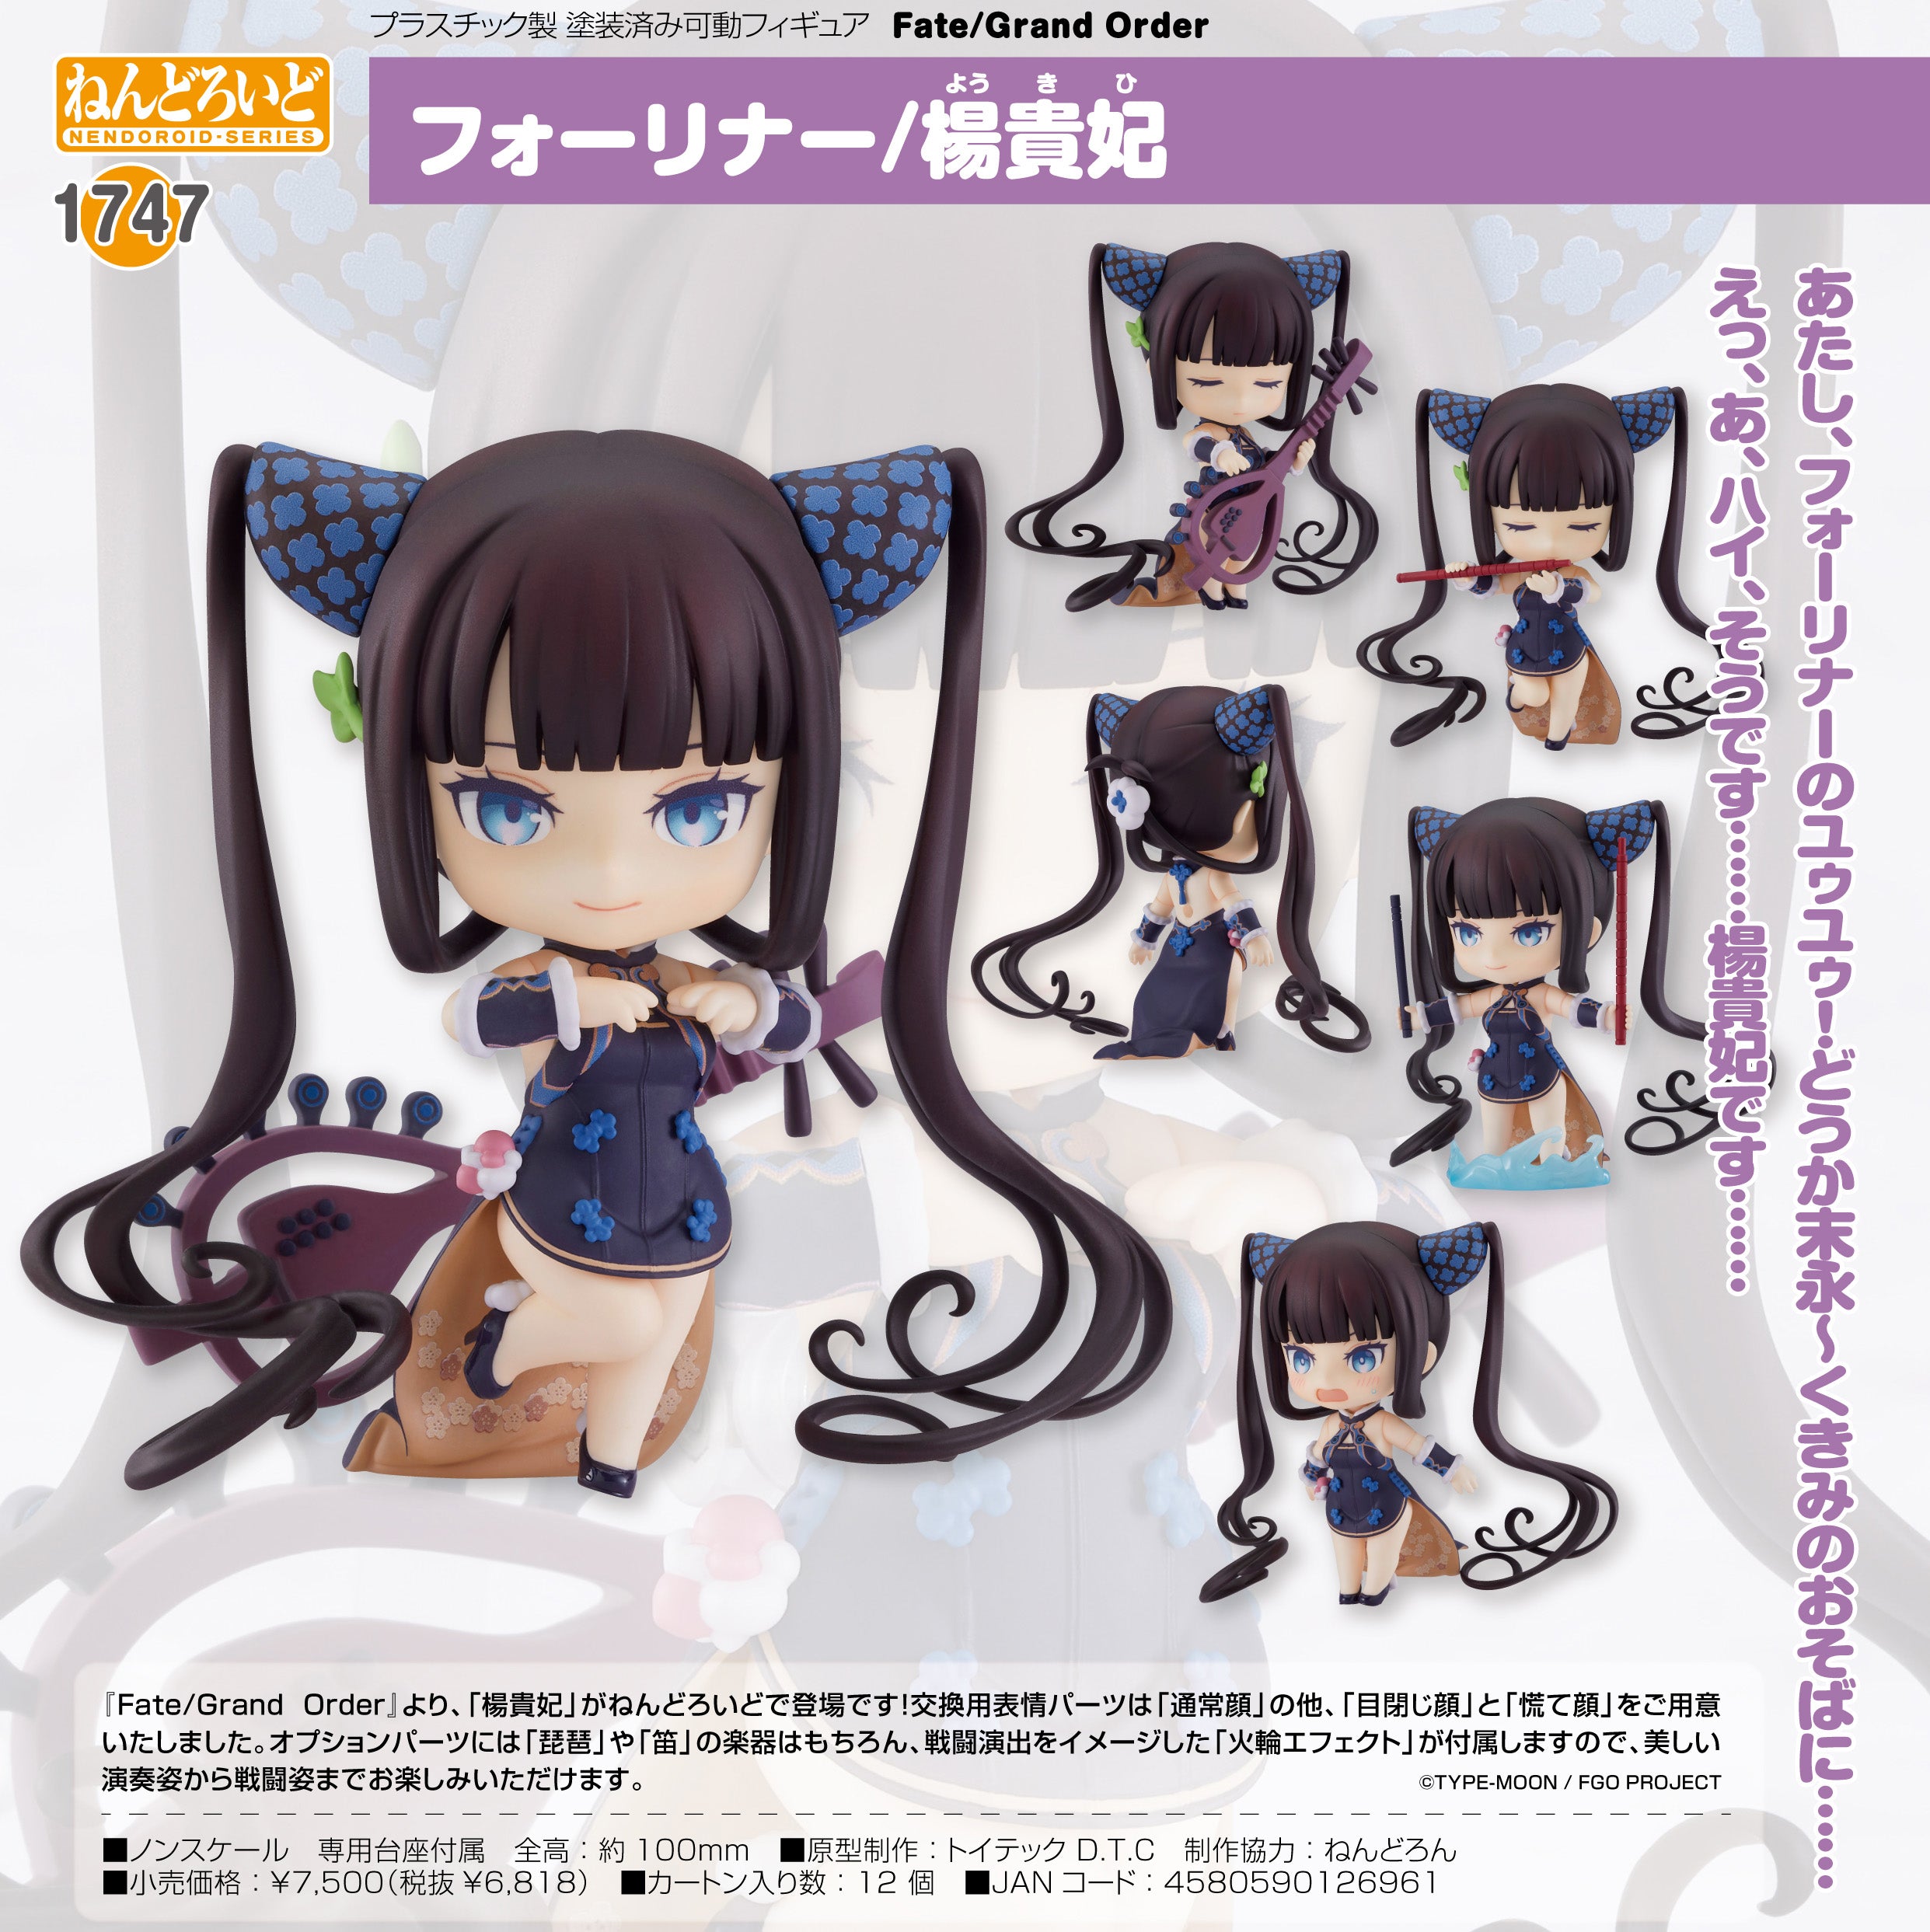 Fate/Grand Order - Foreigner / Yang Guifei - Nendoroid Figure